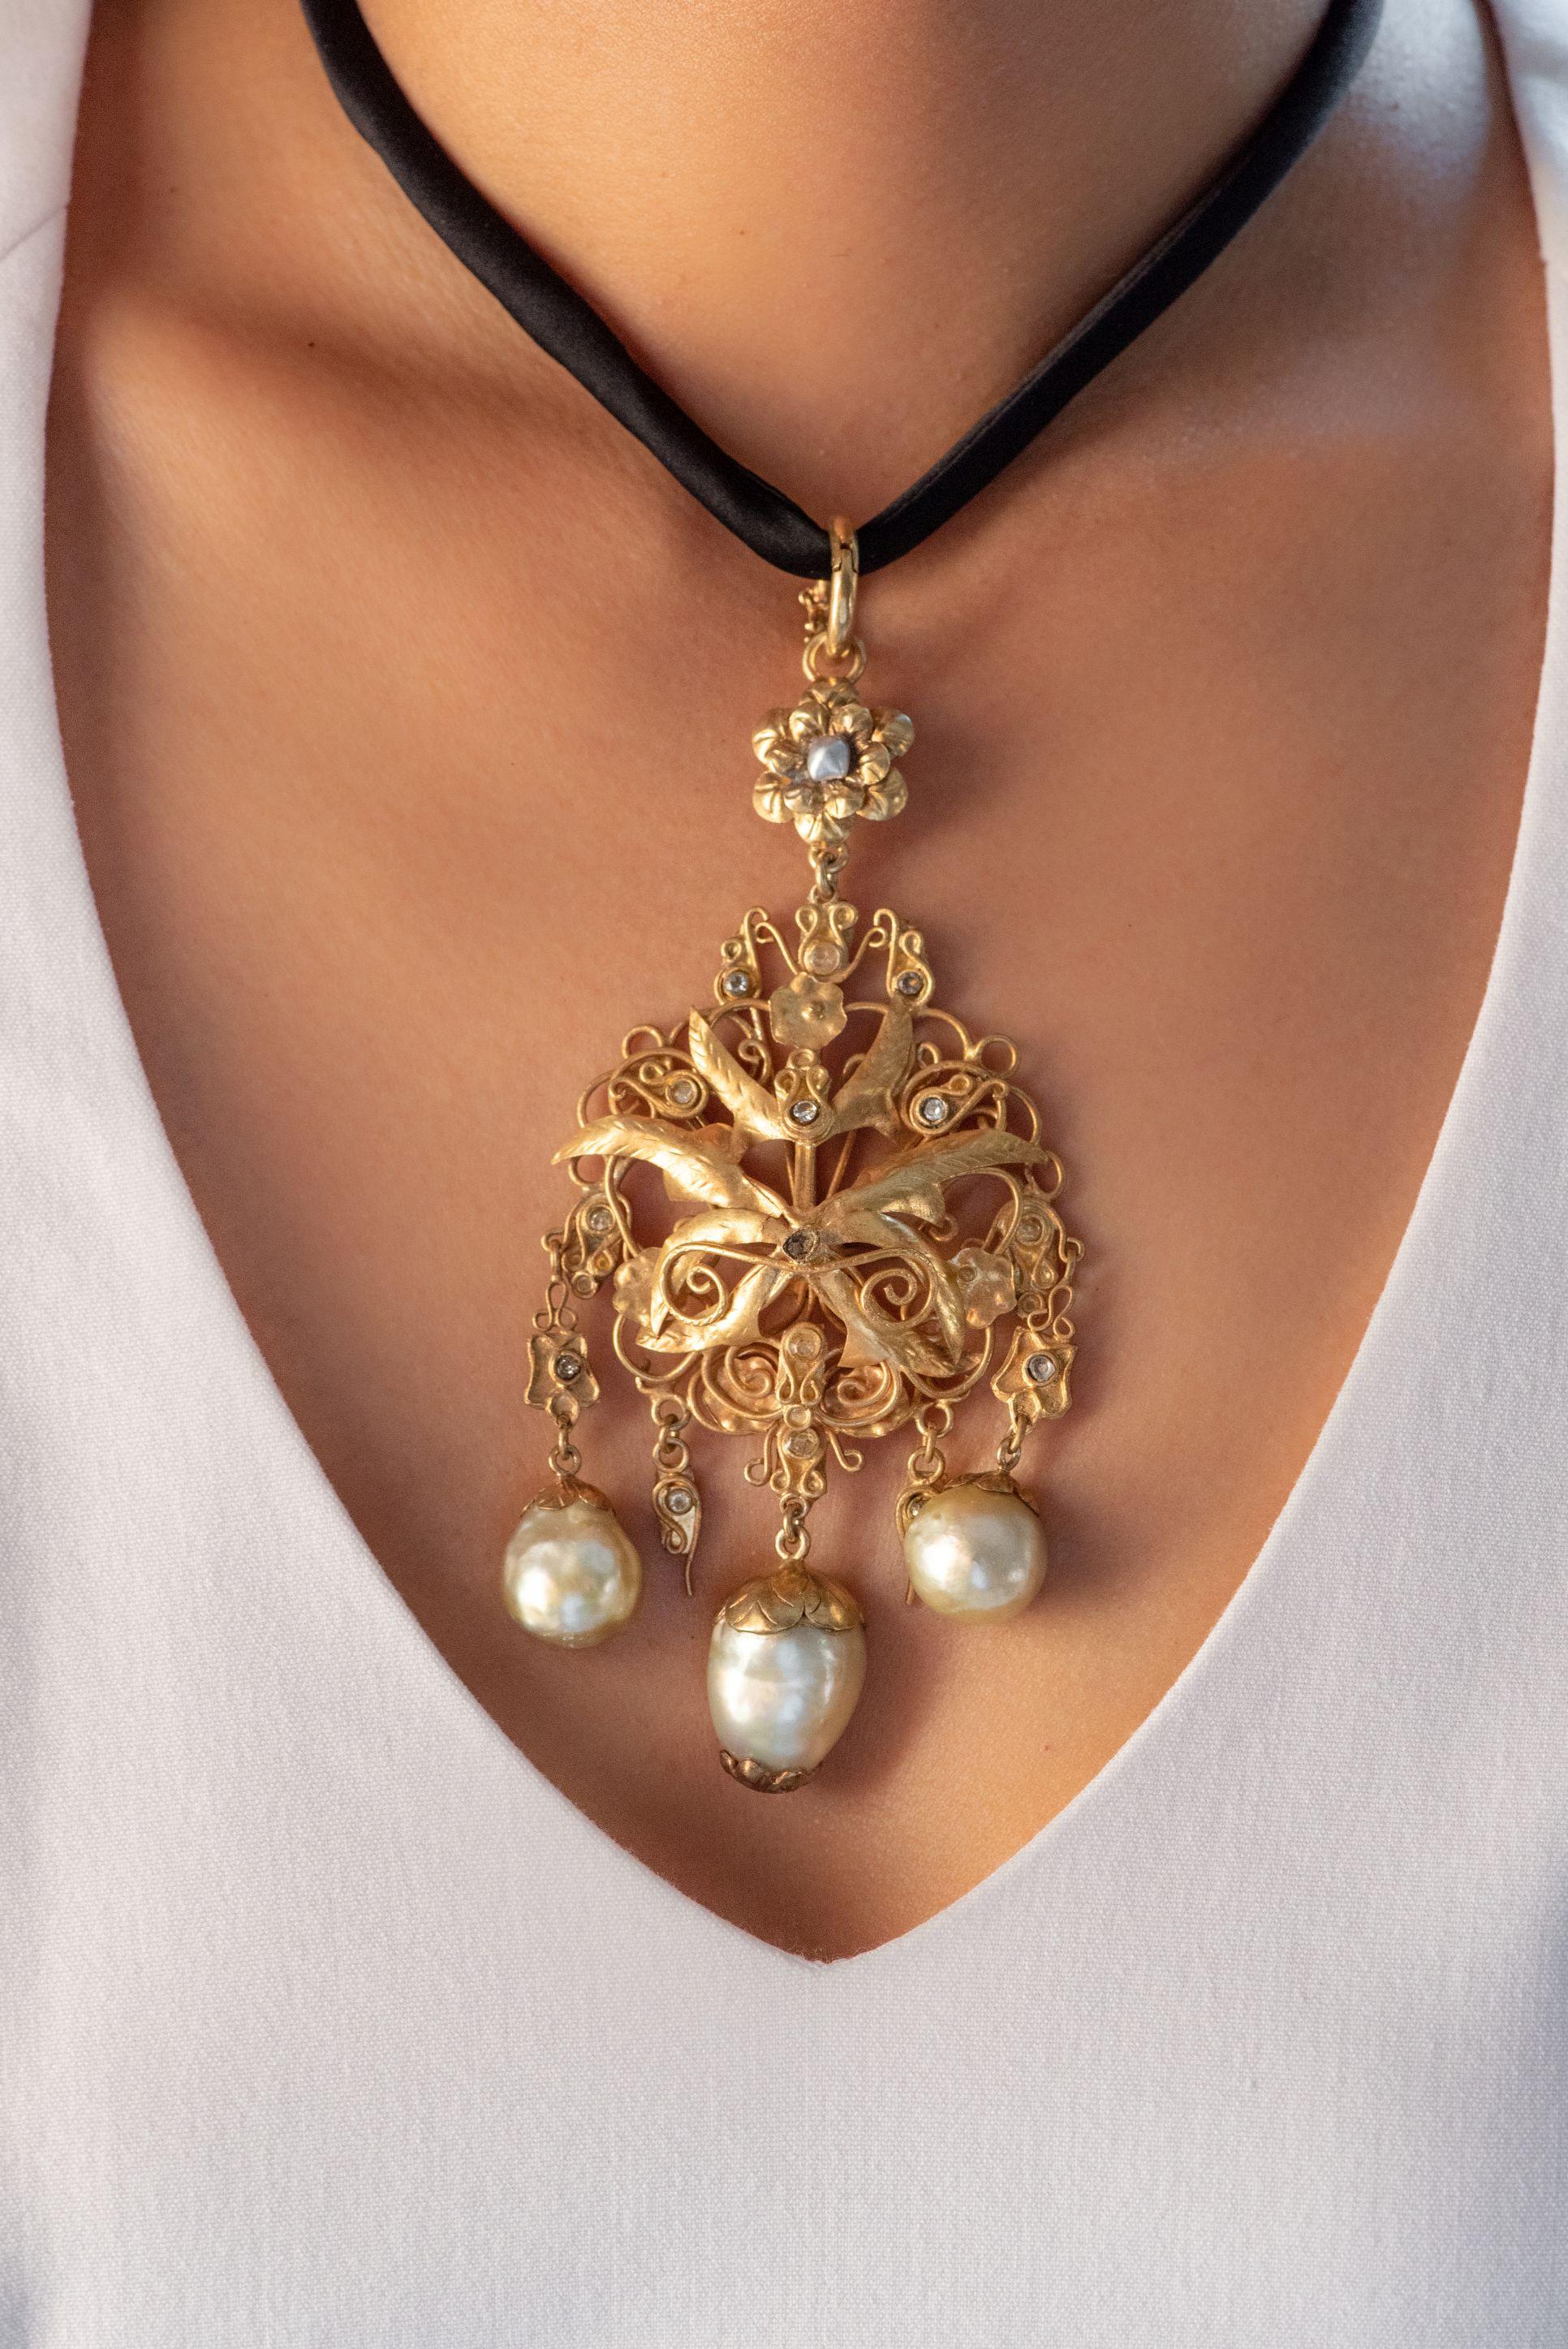 A beautiful gold-plated pendant peppered with 15-22 mm south sea pearls and Intan diamonds hanging from a delicate, detachable silk cord. Fastened with an 18 karat gold plated clasp, the delicate workmanship of this piece is a wonder to